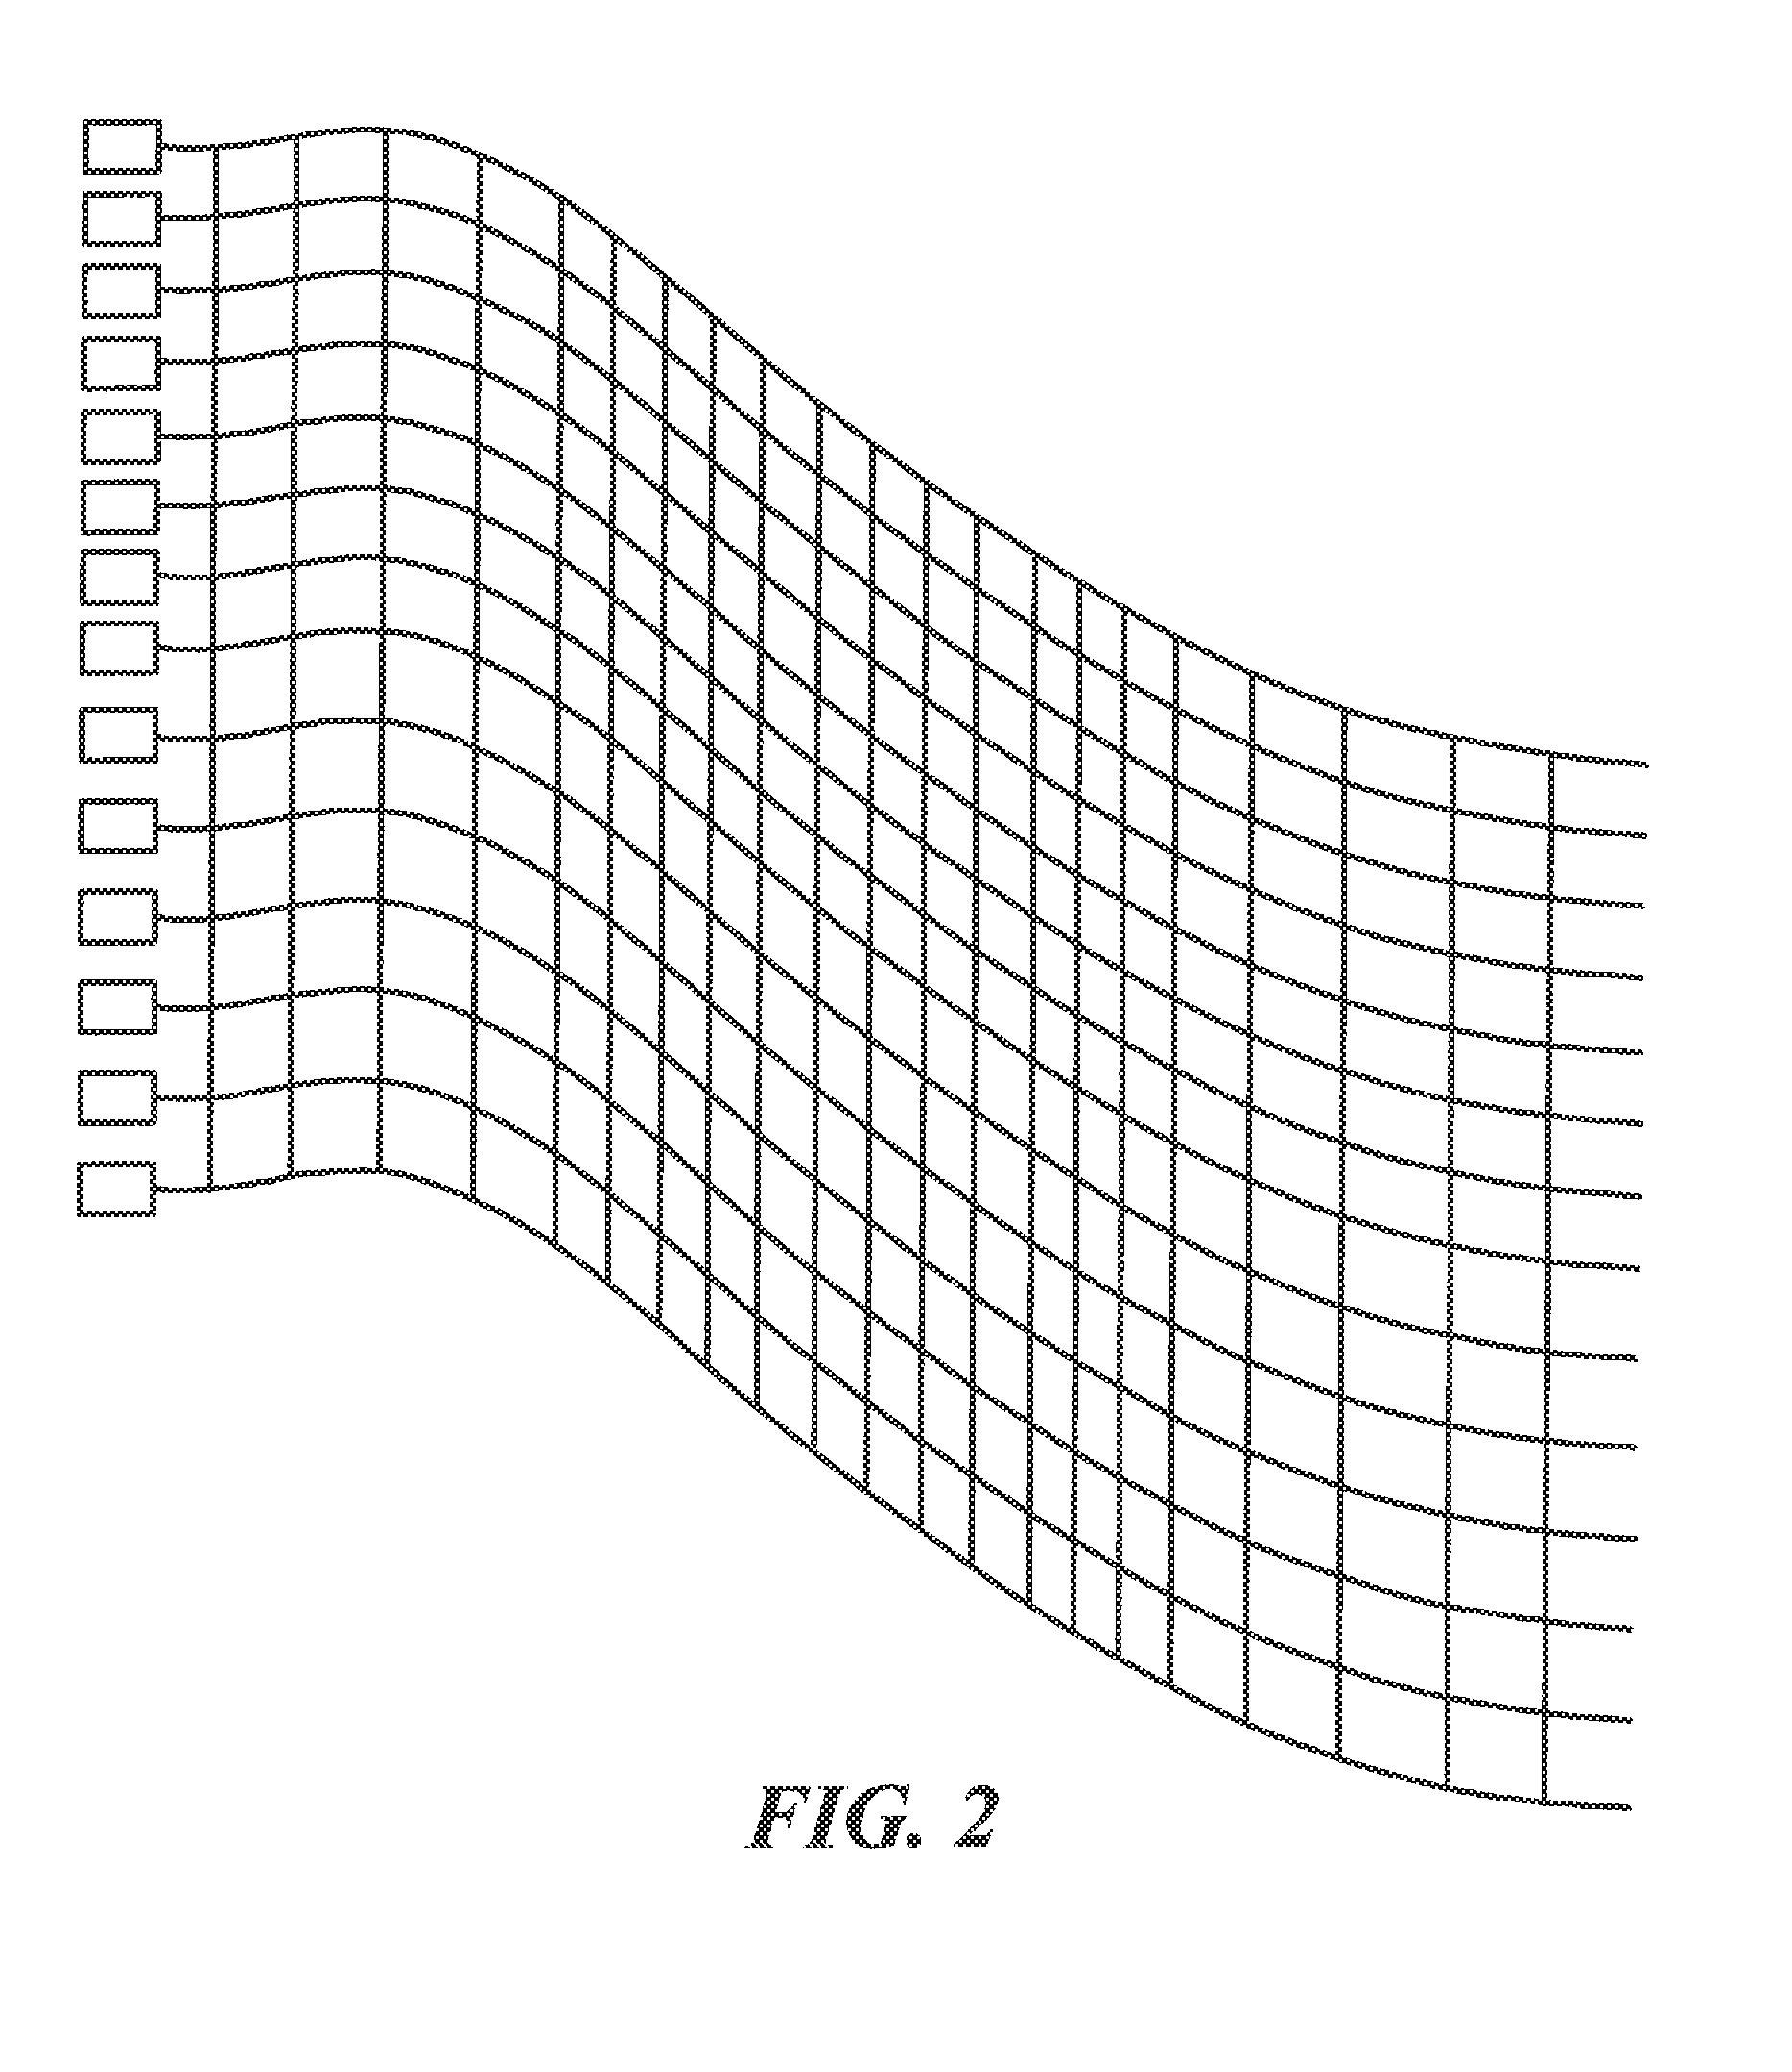 Method and Apparatus for Removing Biofouling From a Protected Surface in a Liquid Environment